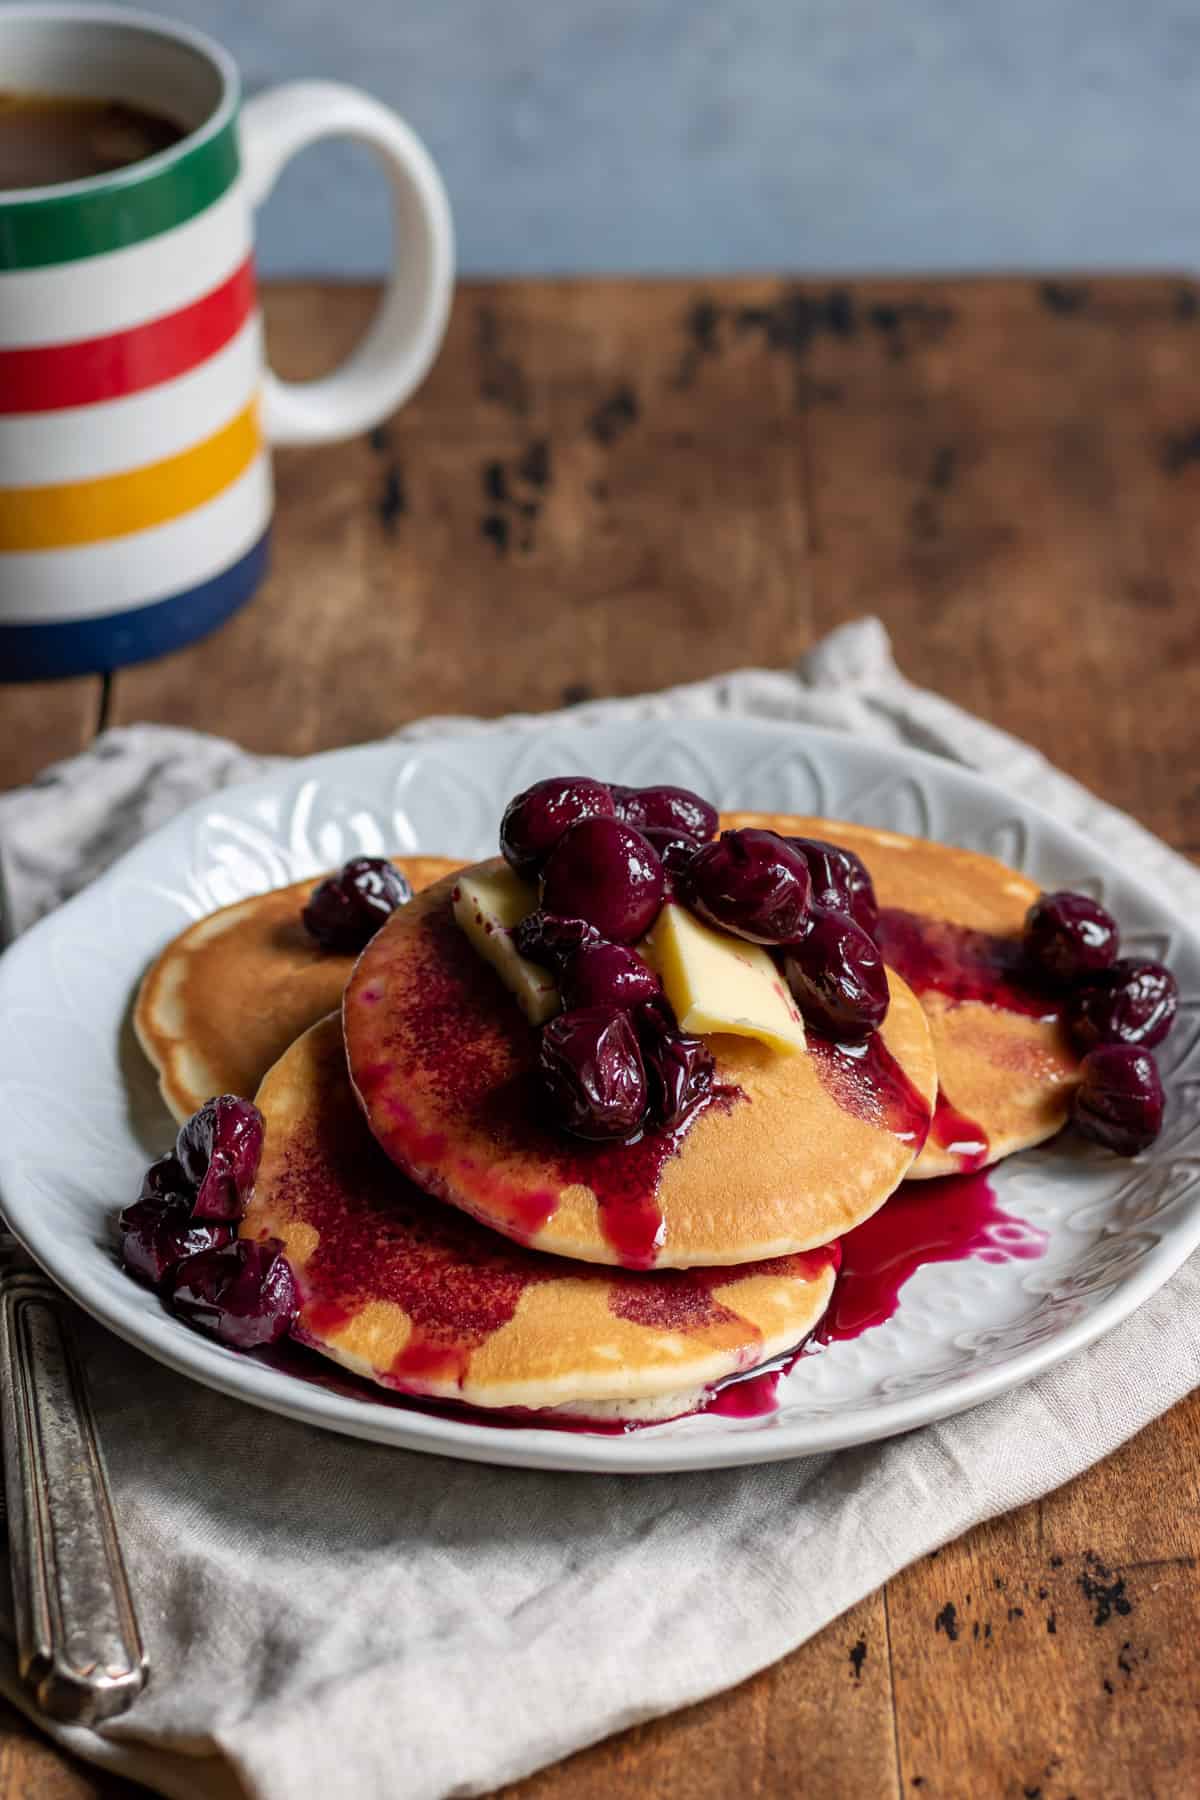 Table with a mug and plate of pancakes topped with grape compote.